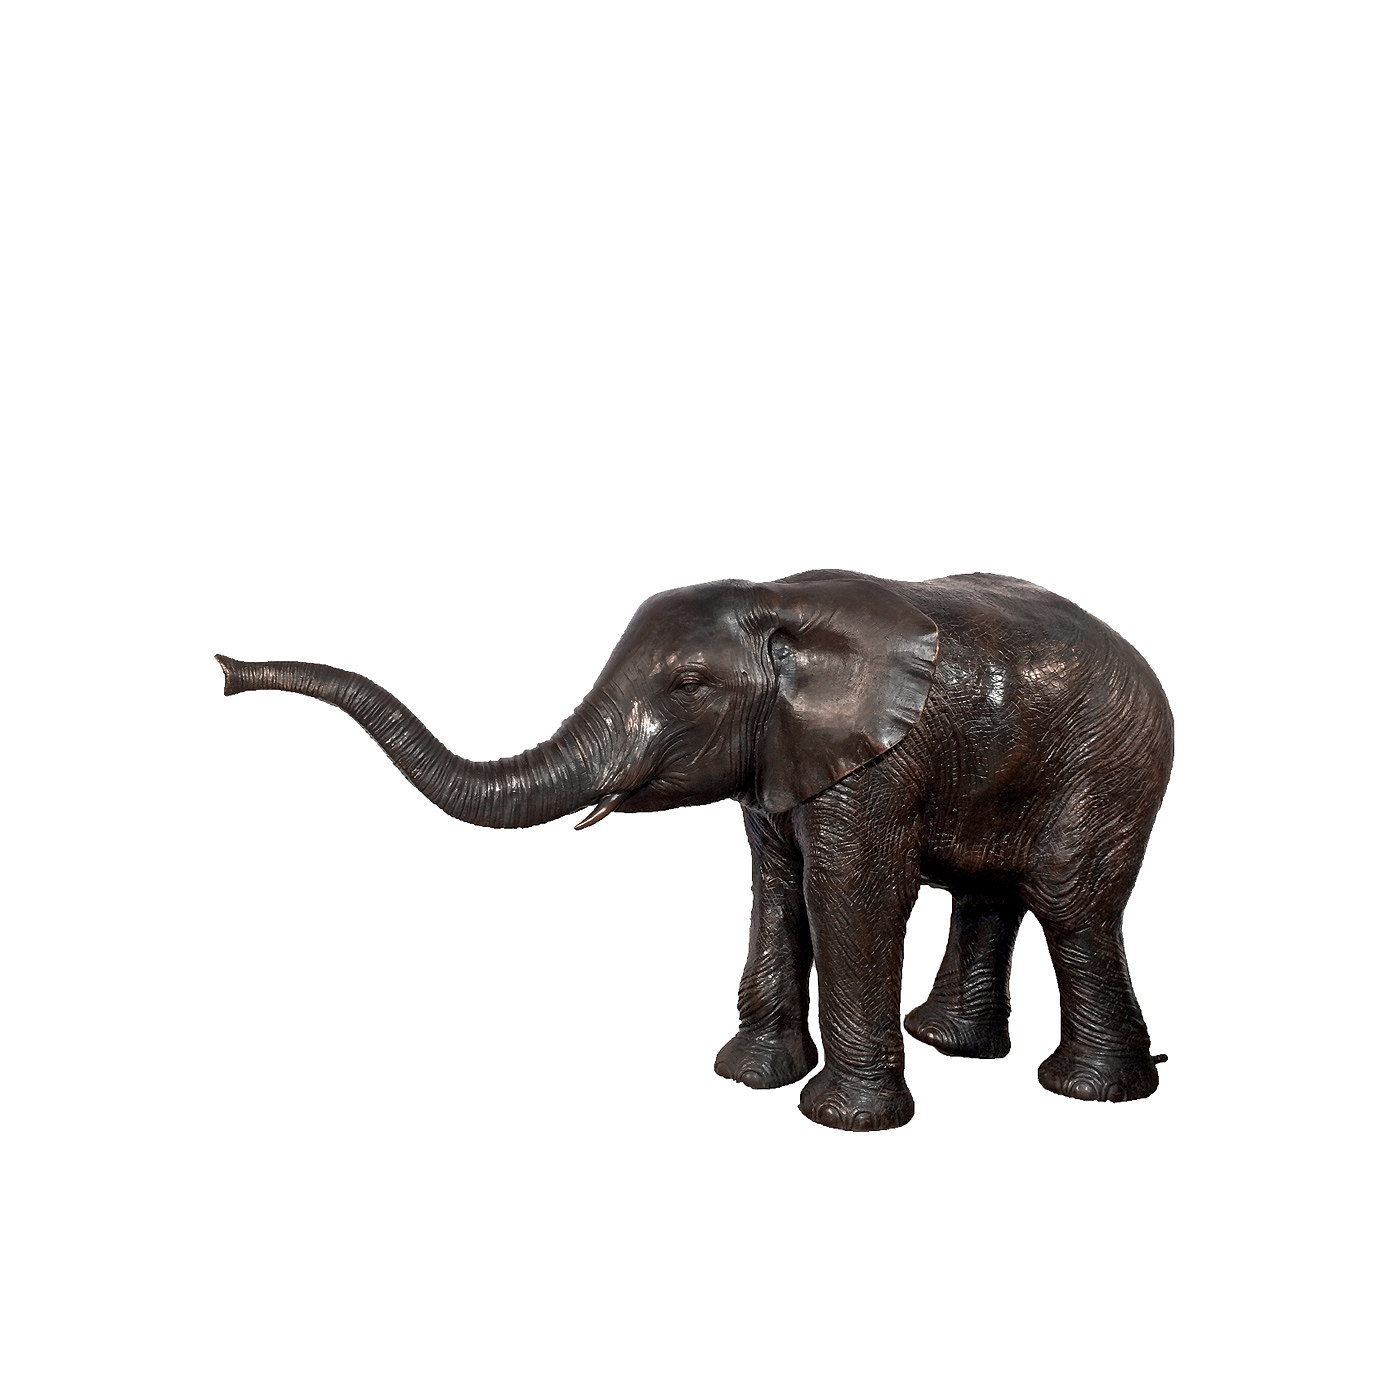 SRB46954A Bronze Baby Elephant with Trunk Up Fountain Sculpture by Metropolitan Galleries Inc